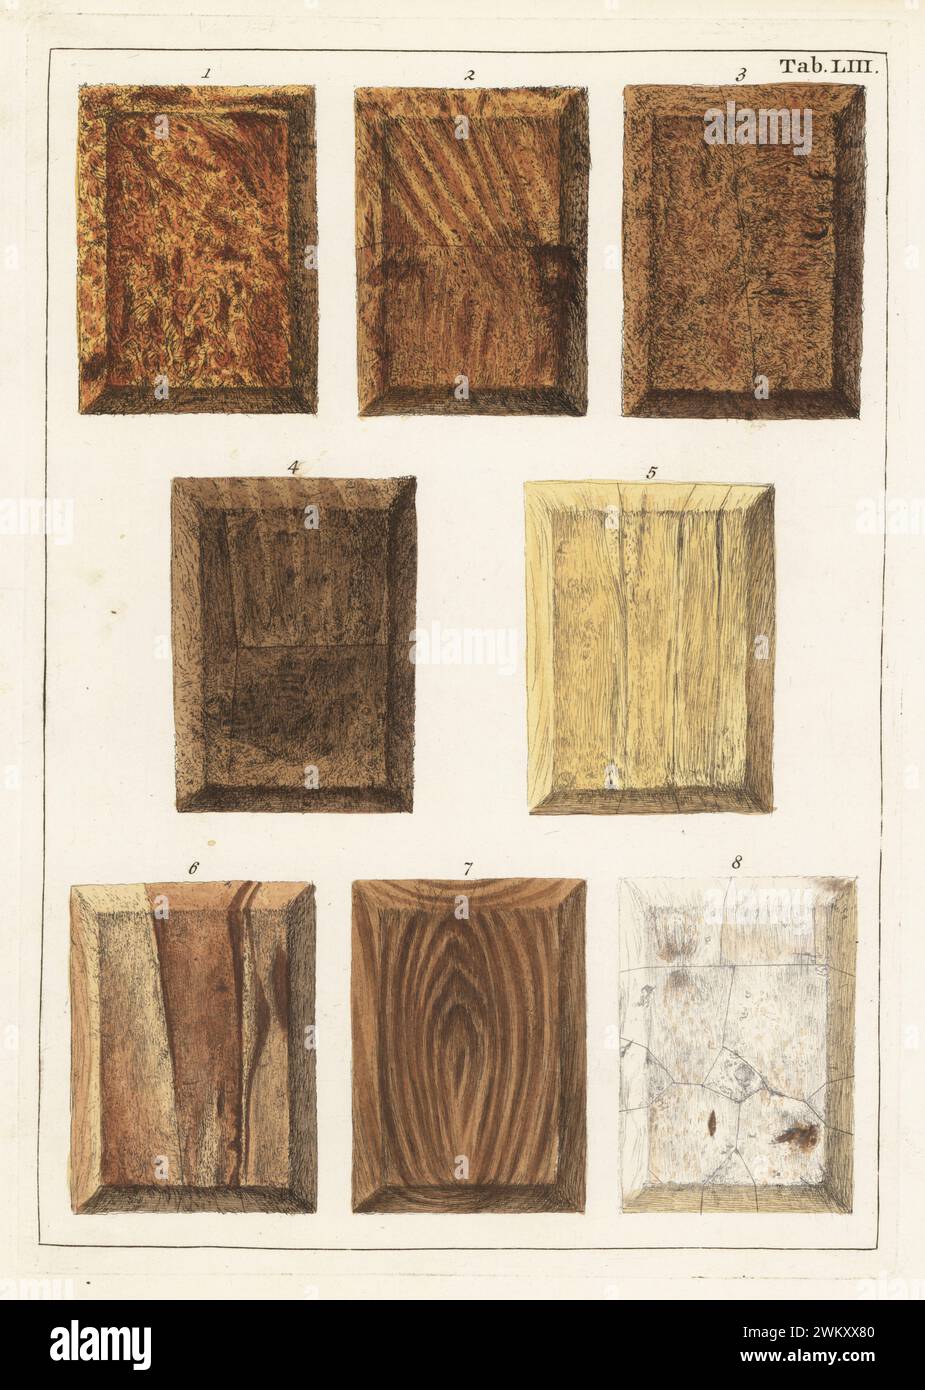 Rhubarb root 1-4, liquorice wood 5, parsley root 6, male Lignum vitae 7 and Hermodactyls root or colchicum 8. Handcoloured copperplate engraving by Jan Christian Sepp from Martinus Houttuyn’s Icones Lignorum exoticorum et nostratium: Wood Science, Representations of Native and Exotic Woods, J.C. Sepp, Amsterdam, Holland, 1773. Stock Photo